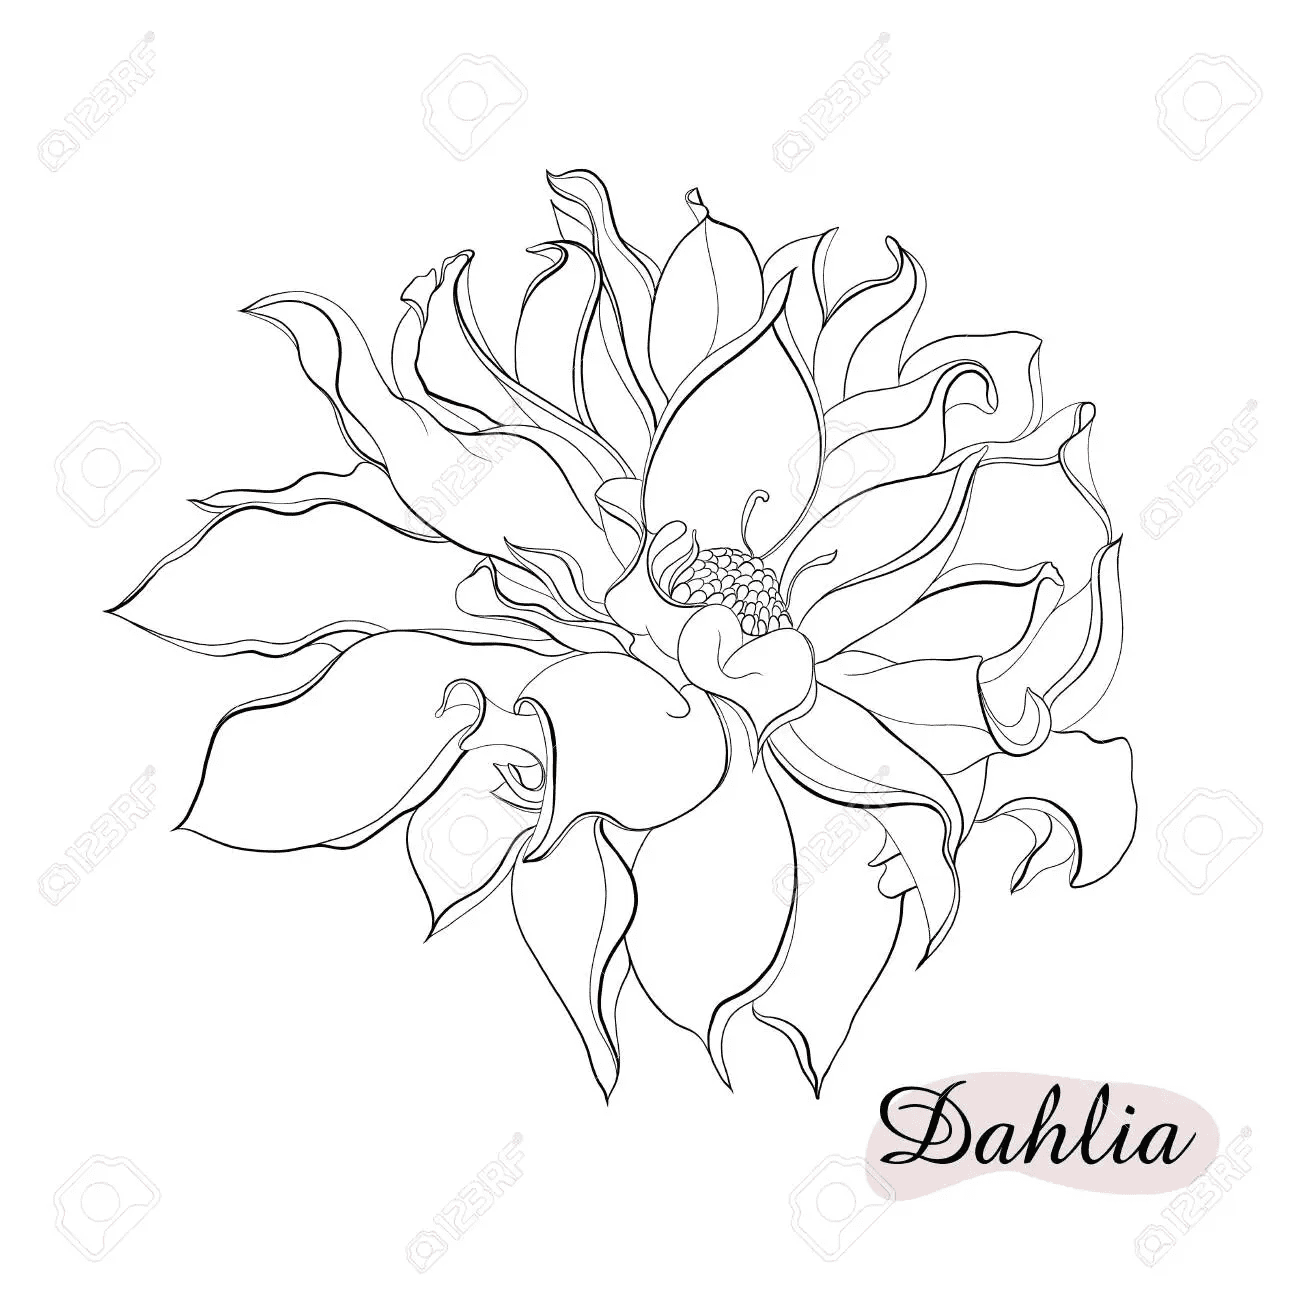 Free Dahlia For Chirldren Coloring Page